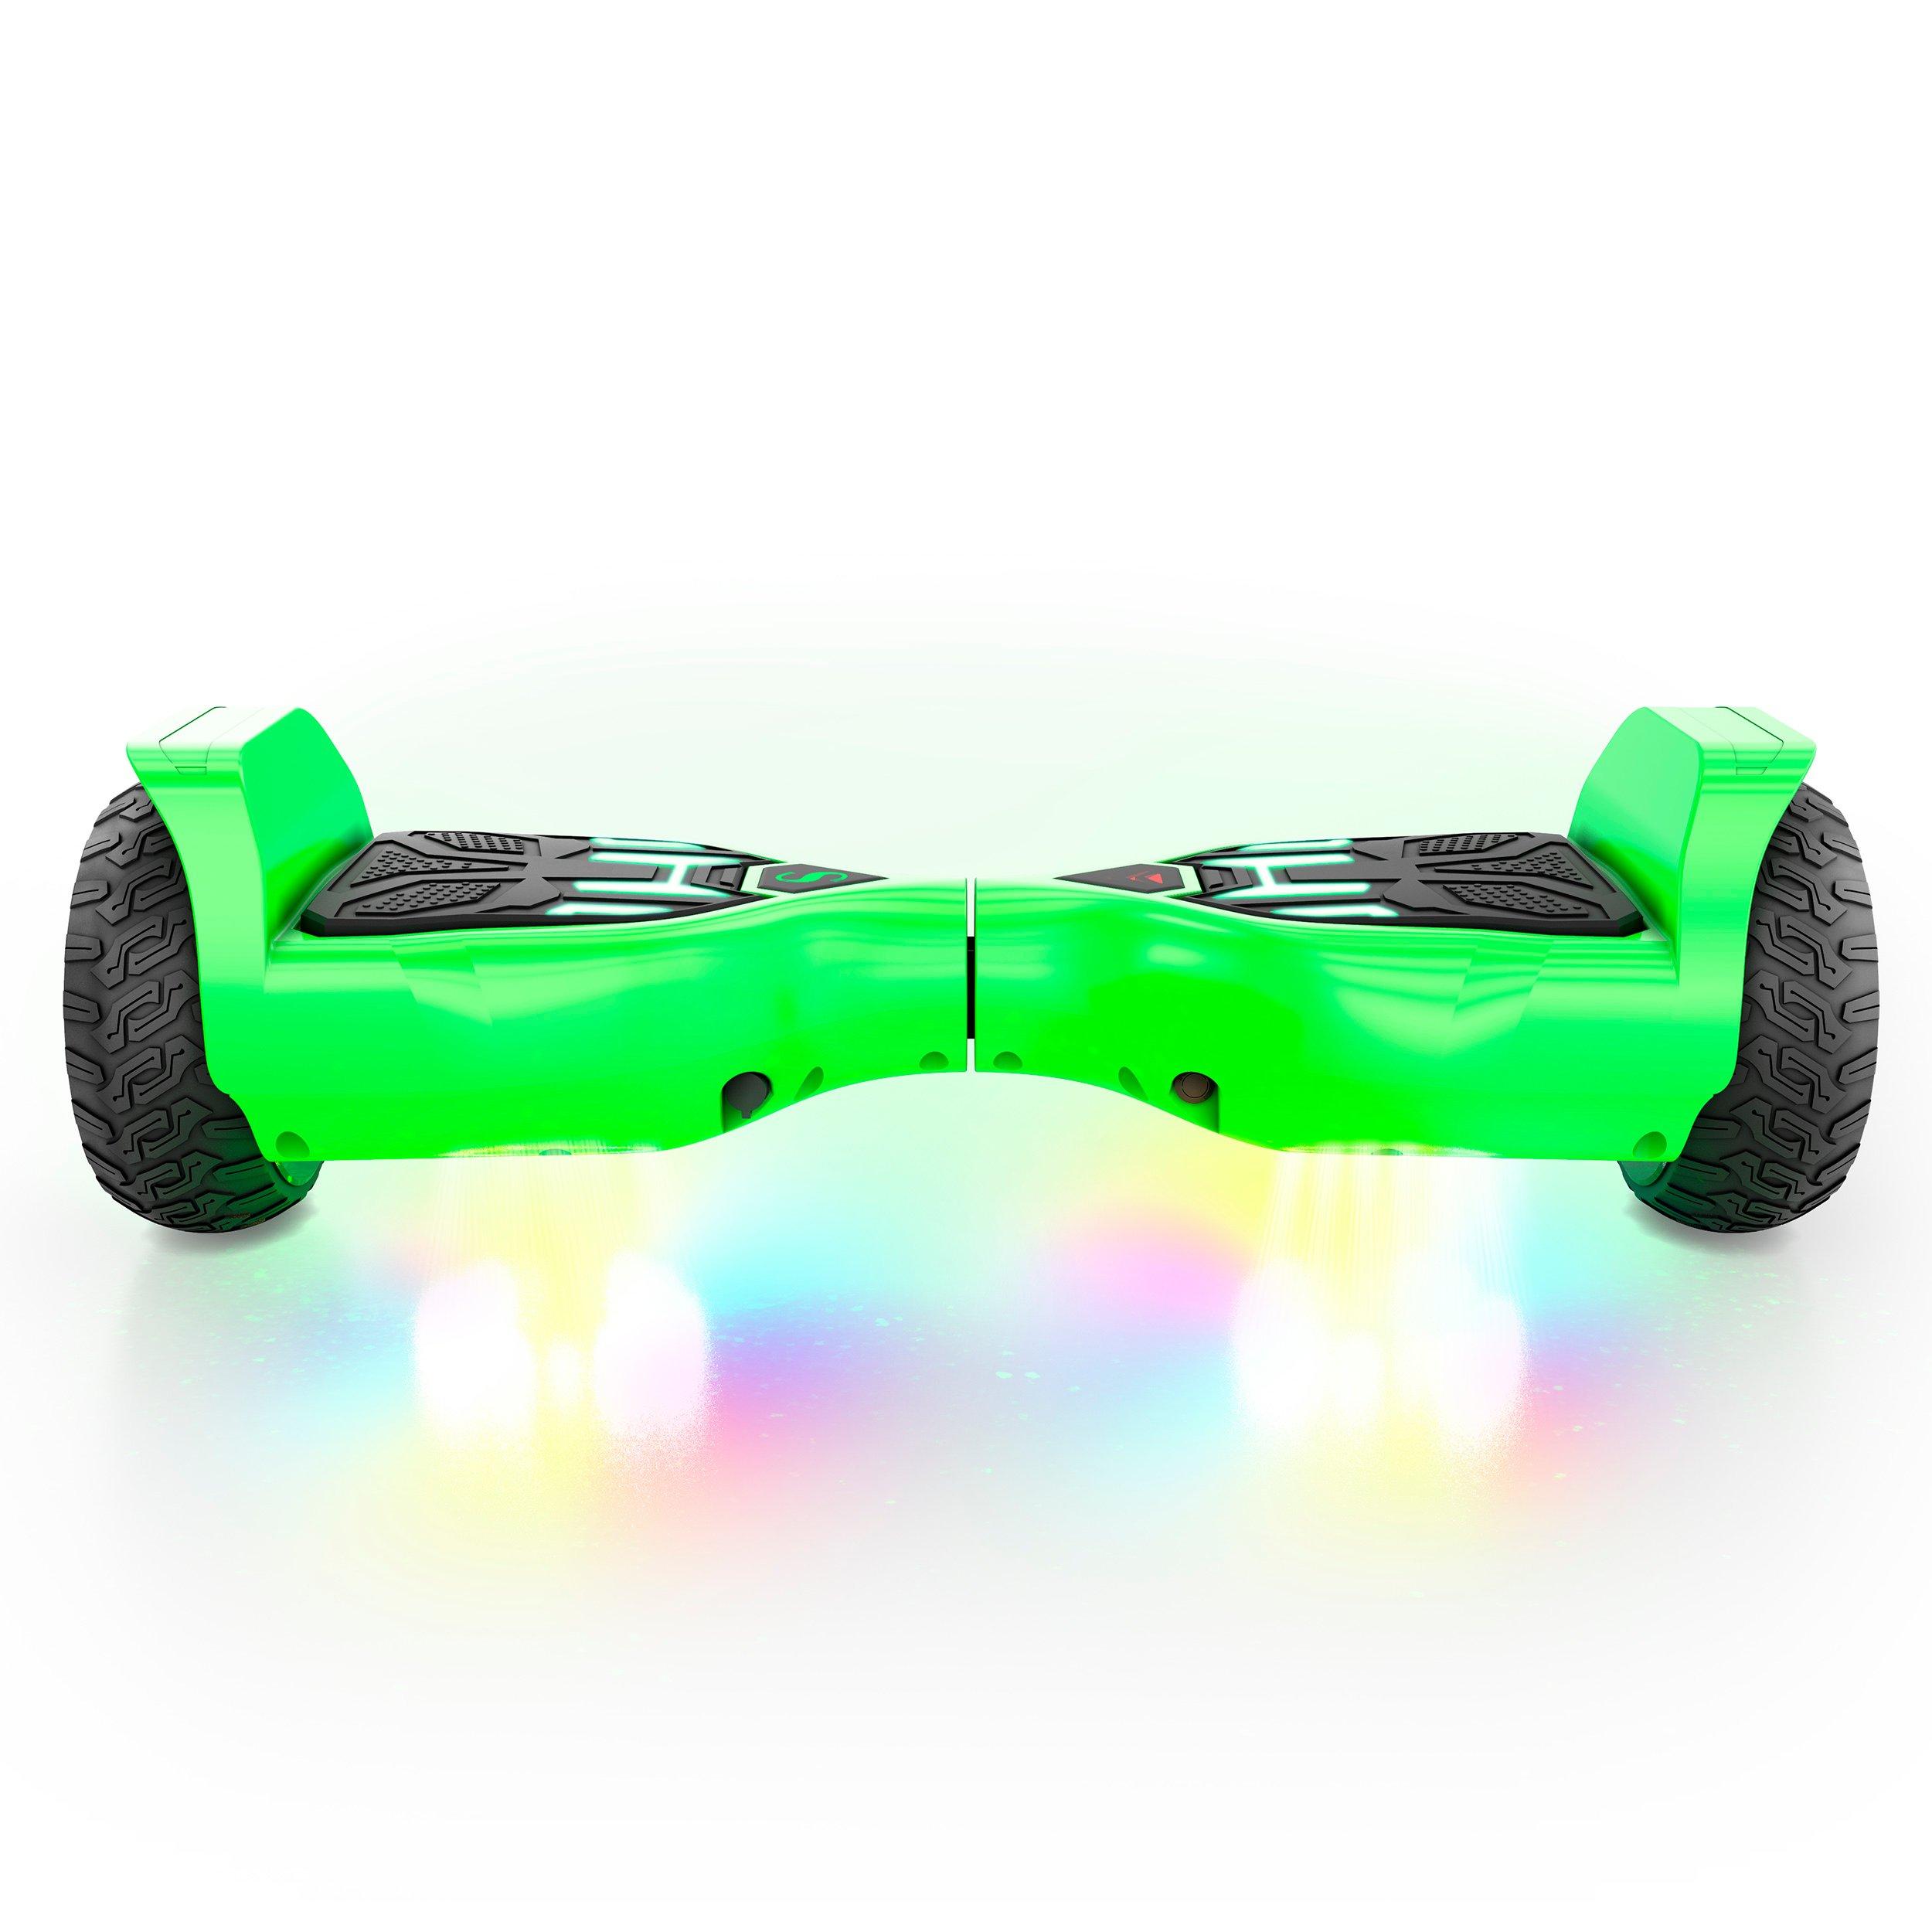 list item 9 of 9 swagBOARD Warrior T580 Hoverboard with MusicSynced Light-Up LED Wheels